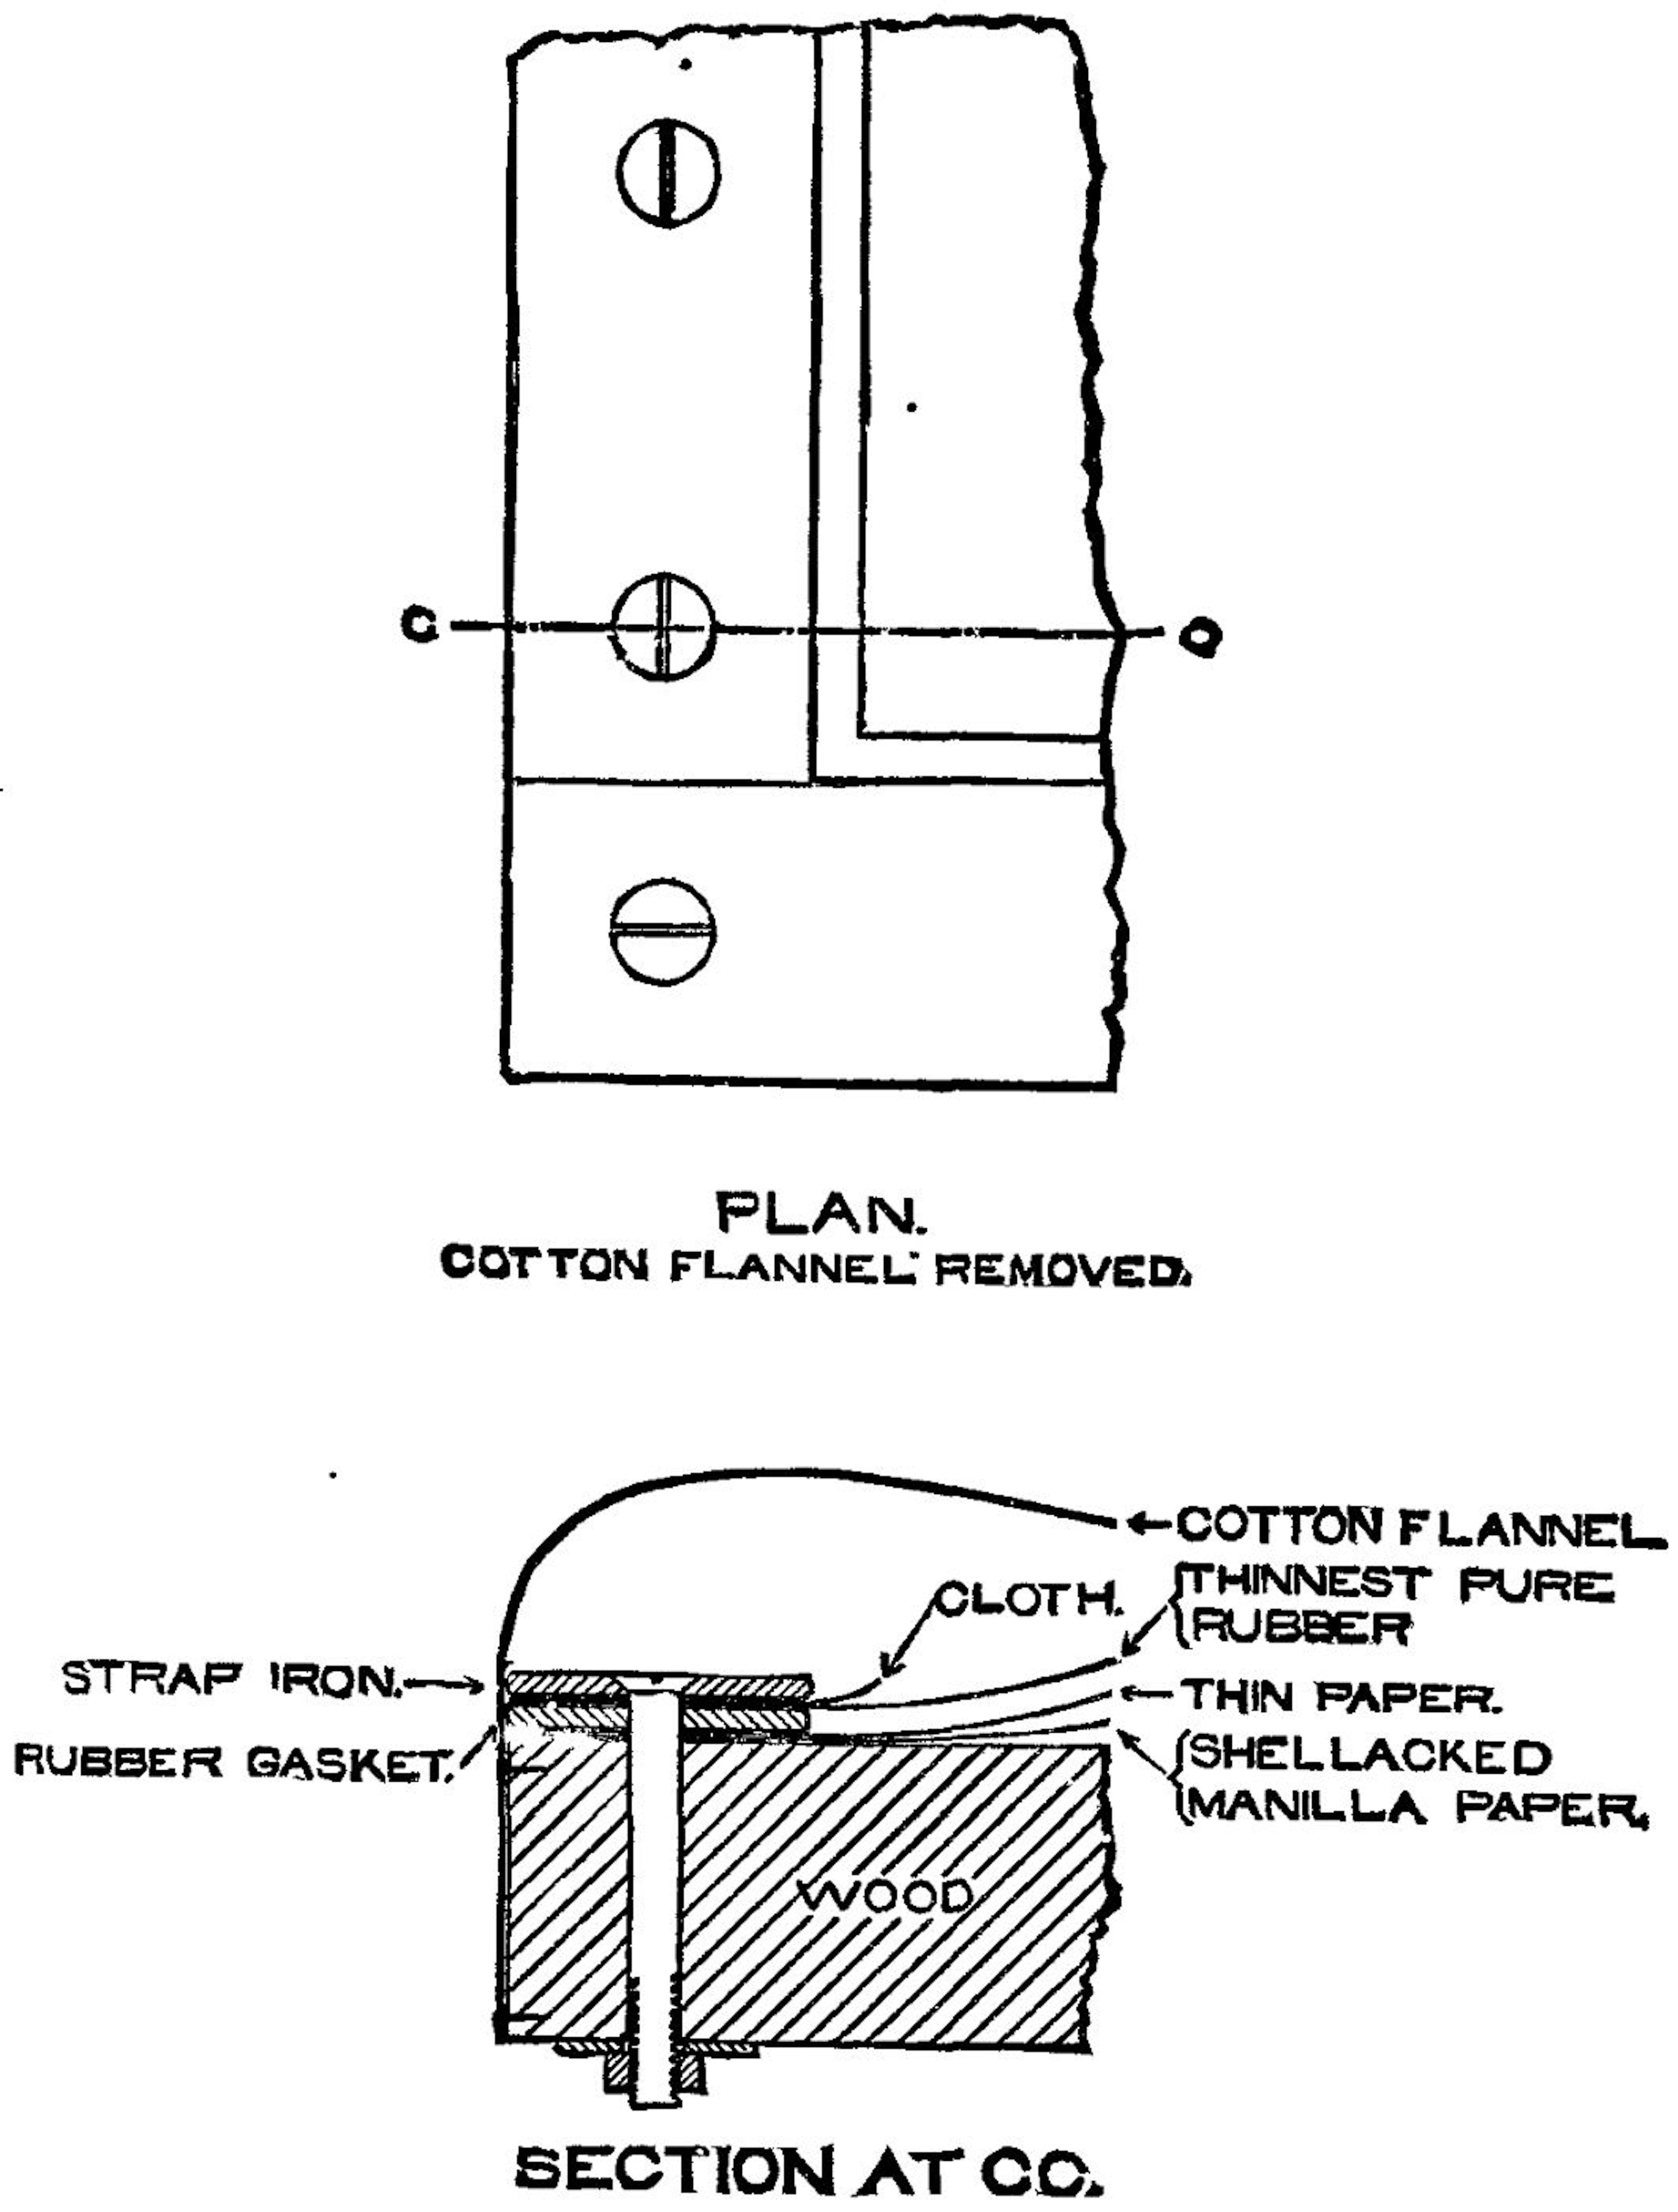 PLAN. COTTON FLANNEL REMOVED.SECTION AT CO.